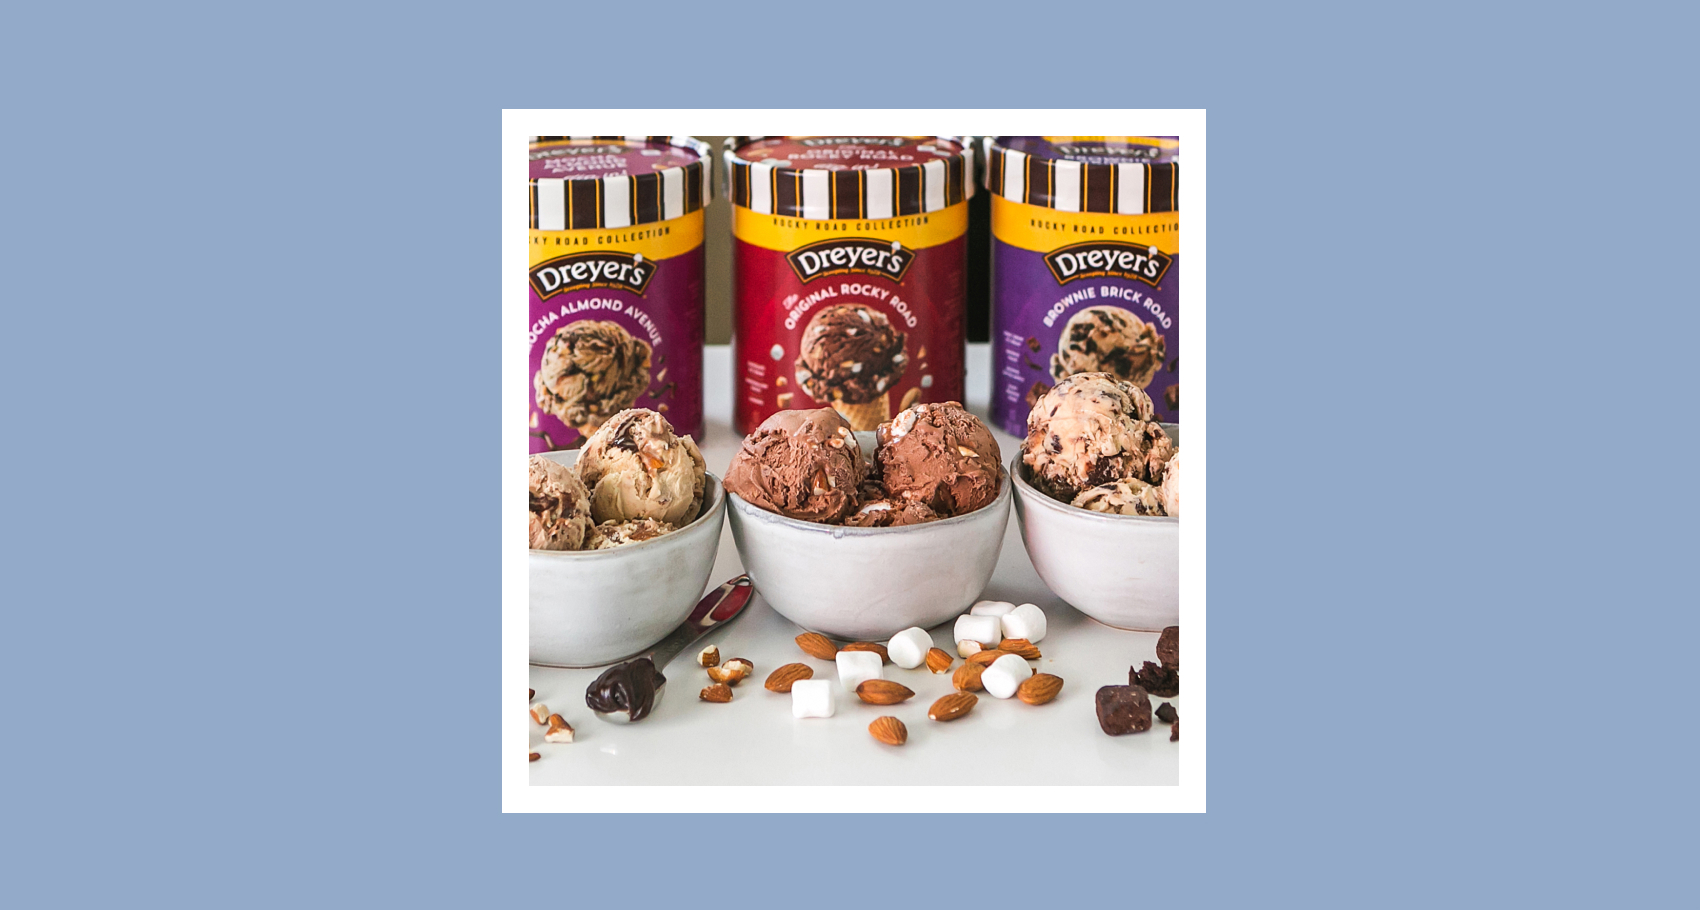 Three cartons of Dreyer's rocky road ice cream with behind bowls of ice cream